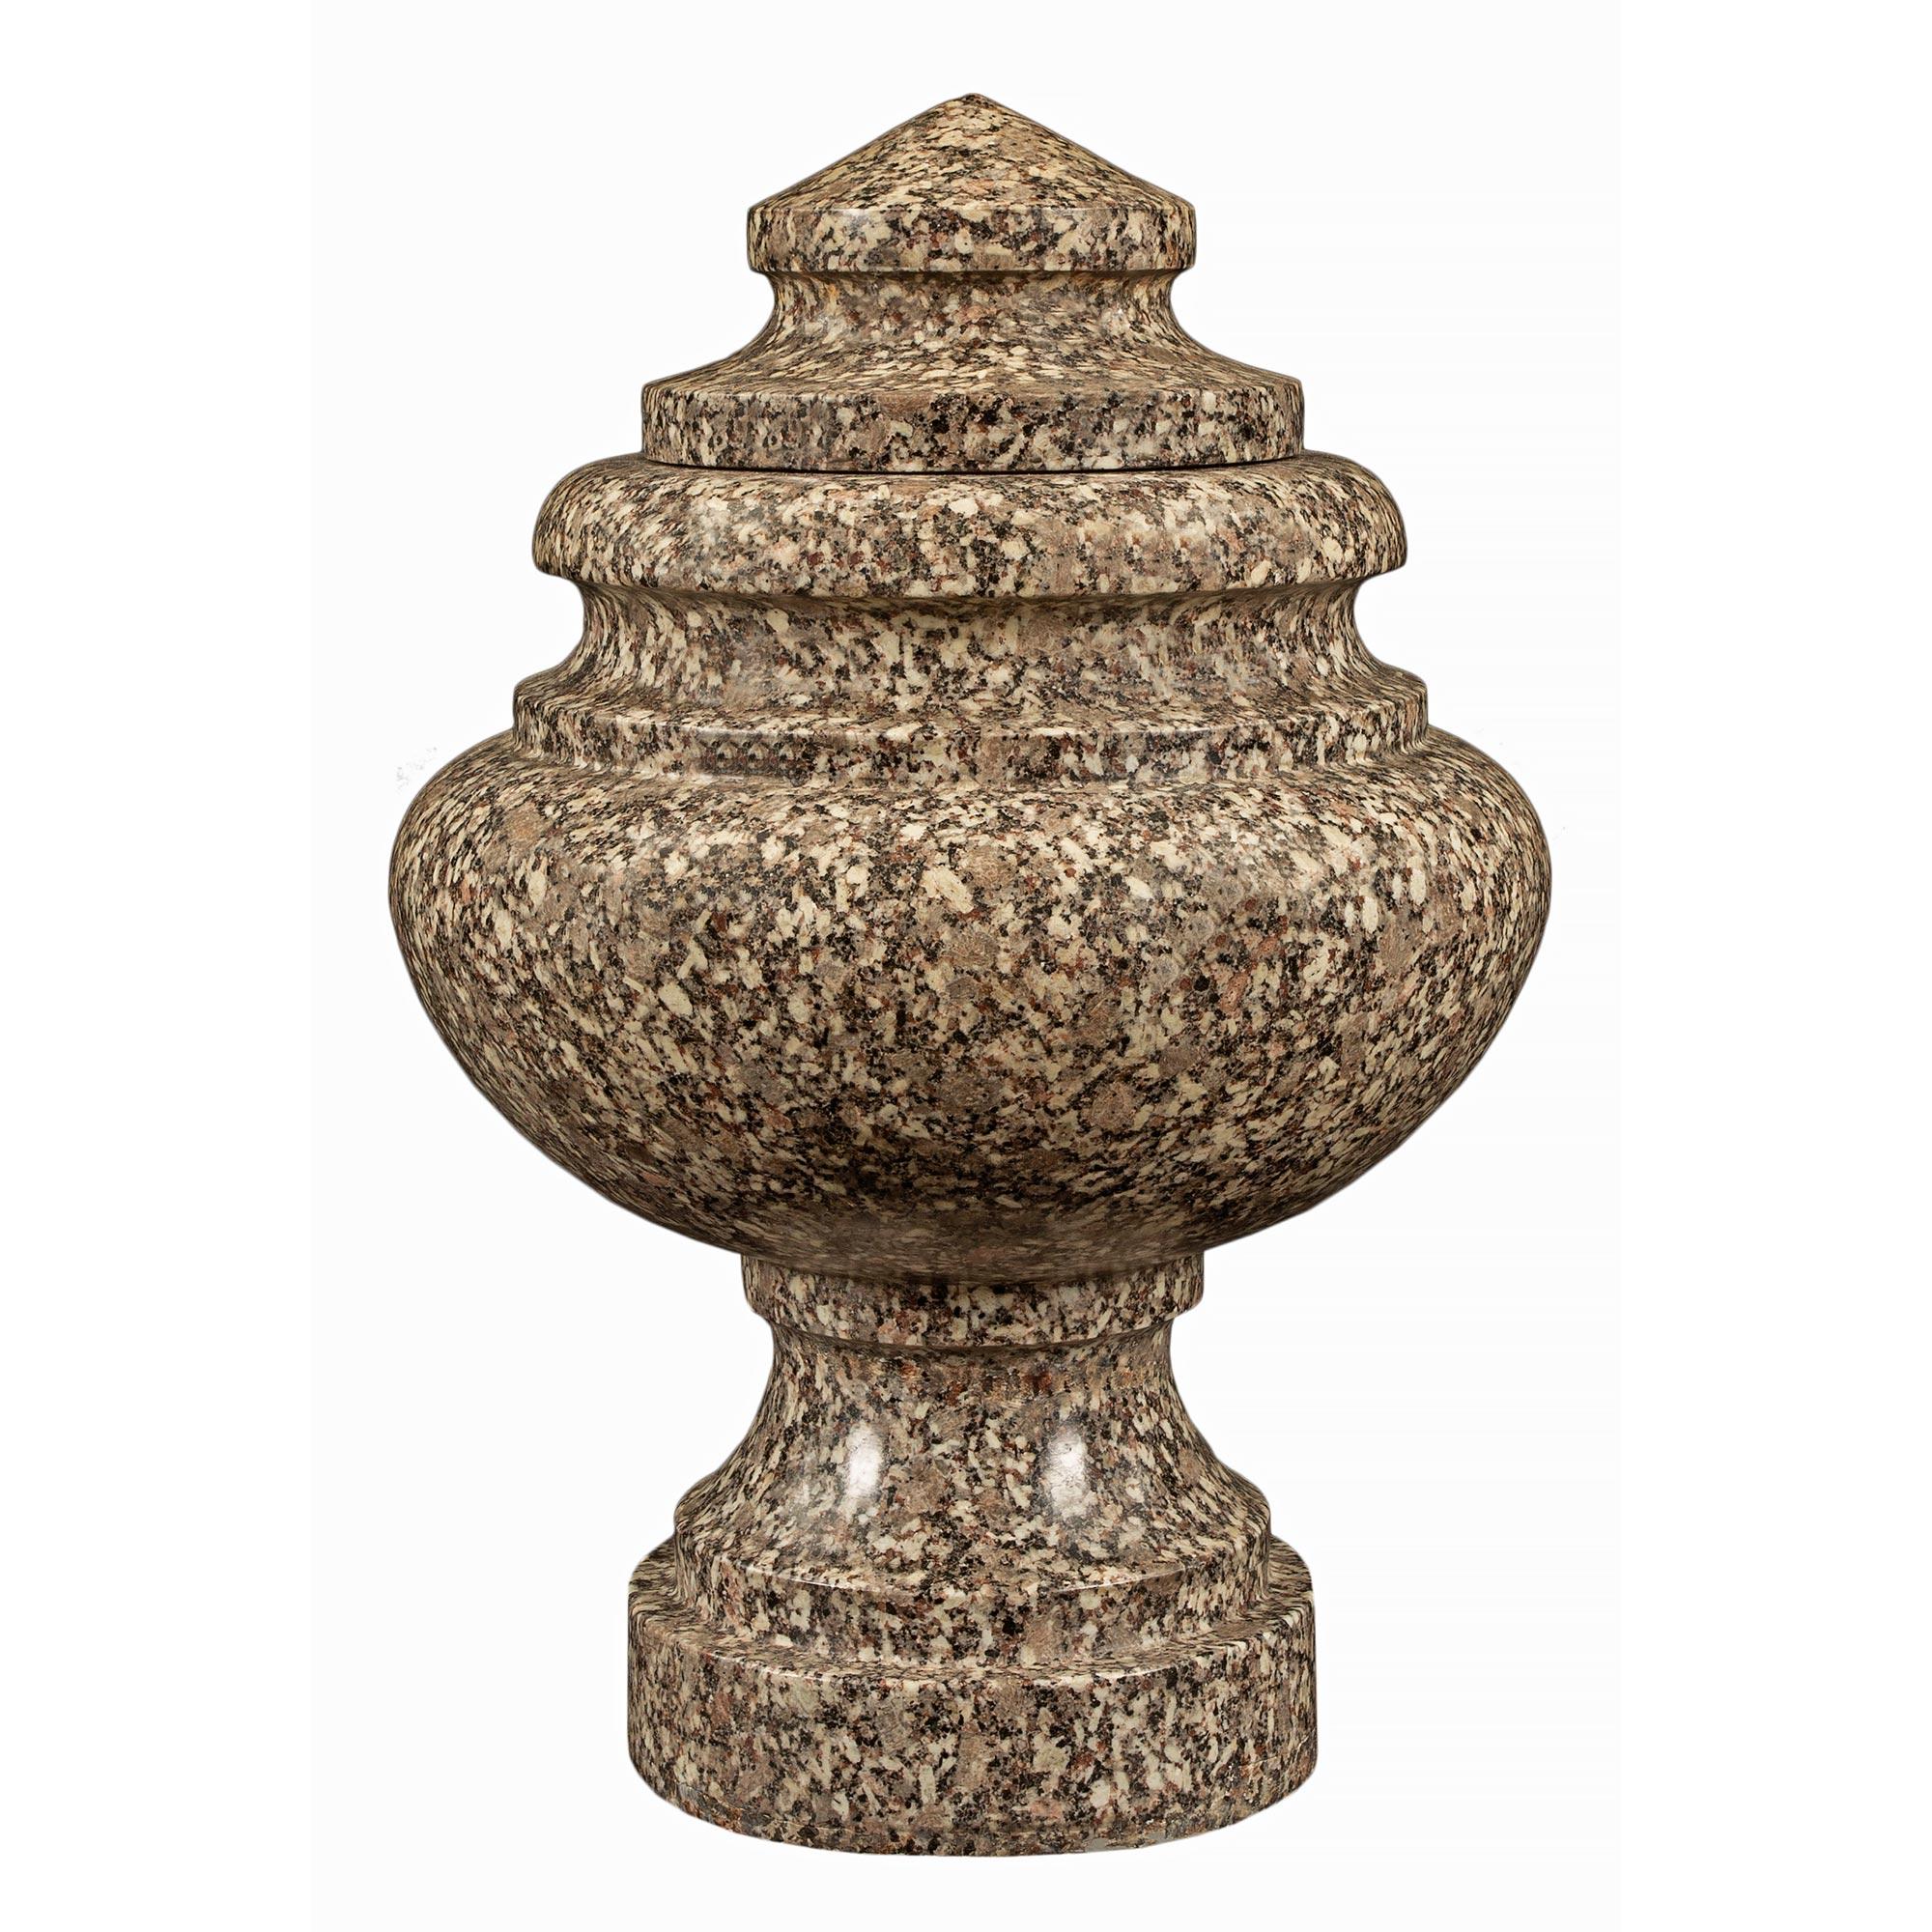 A stunning pair of Italian 19th century Neo-Classical st. granite lidded urns. Each urn is raised by a circular mottled base and socle pedestal. The body displays an elegant shape and mottled rim blow the removable lid which ends in a unique and